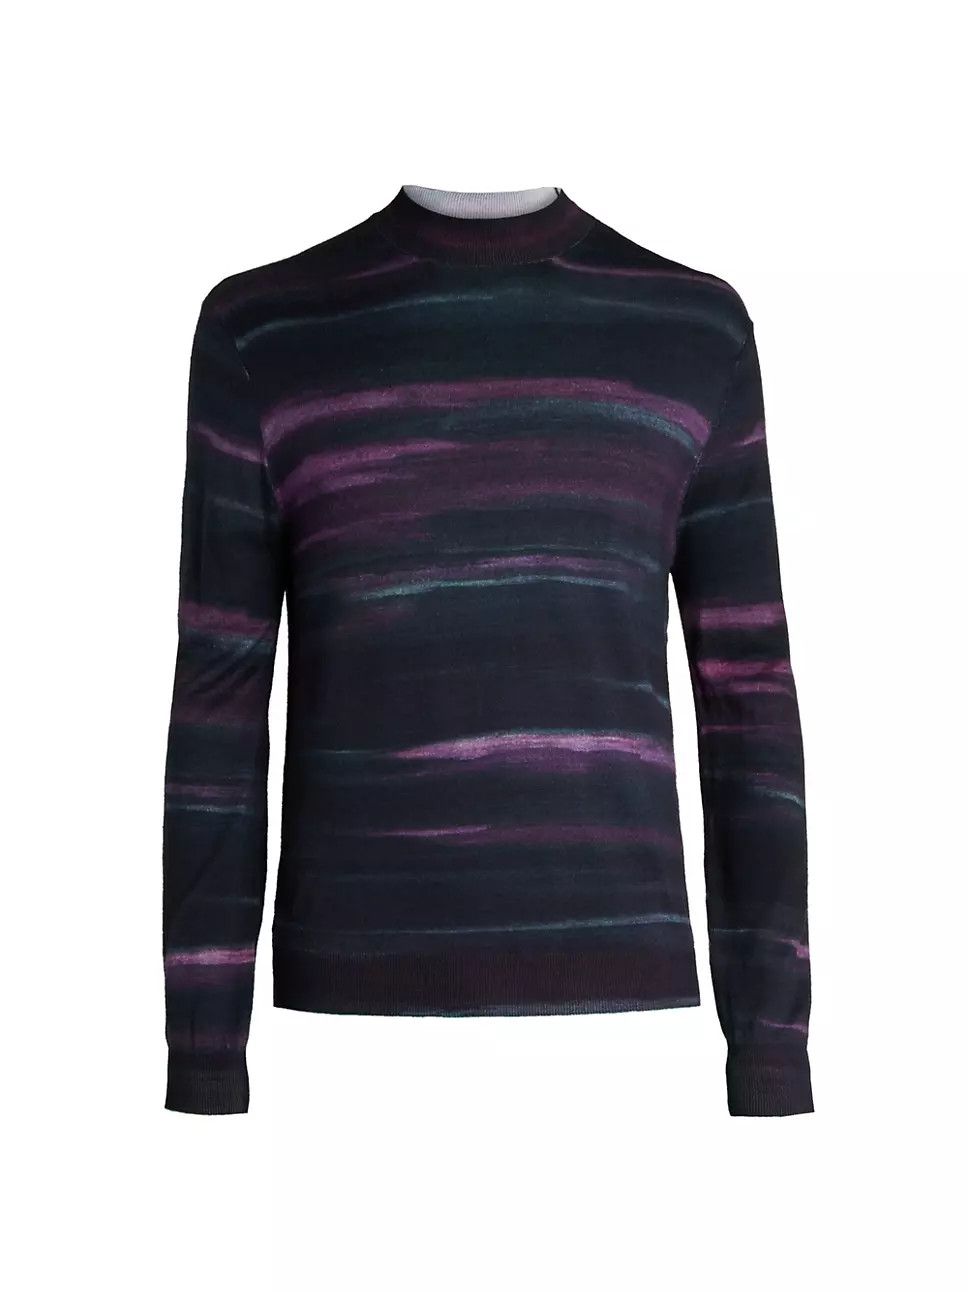 Robert Graham Sweater, new with tags | Grailed